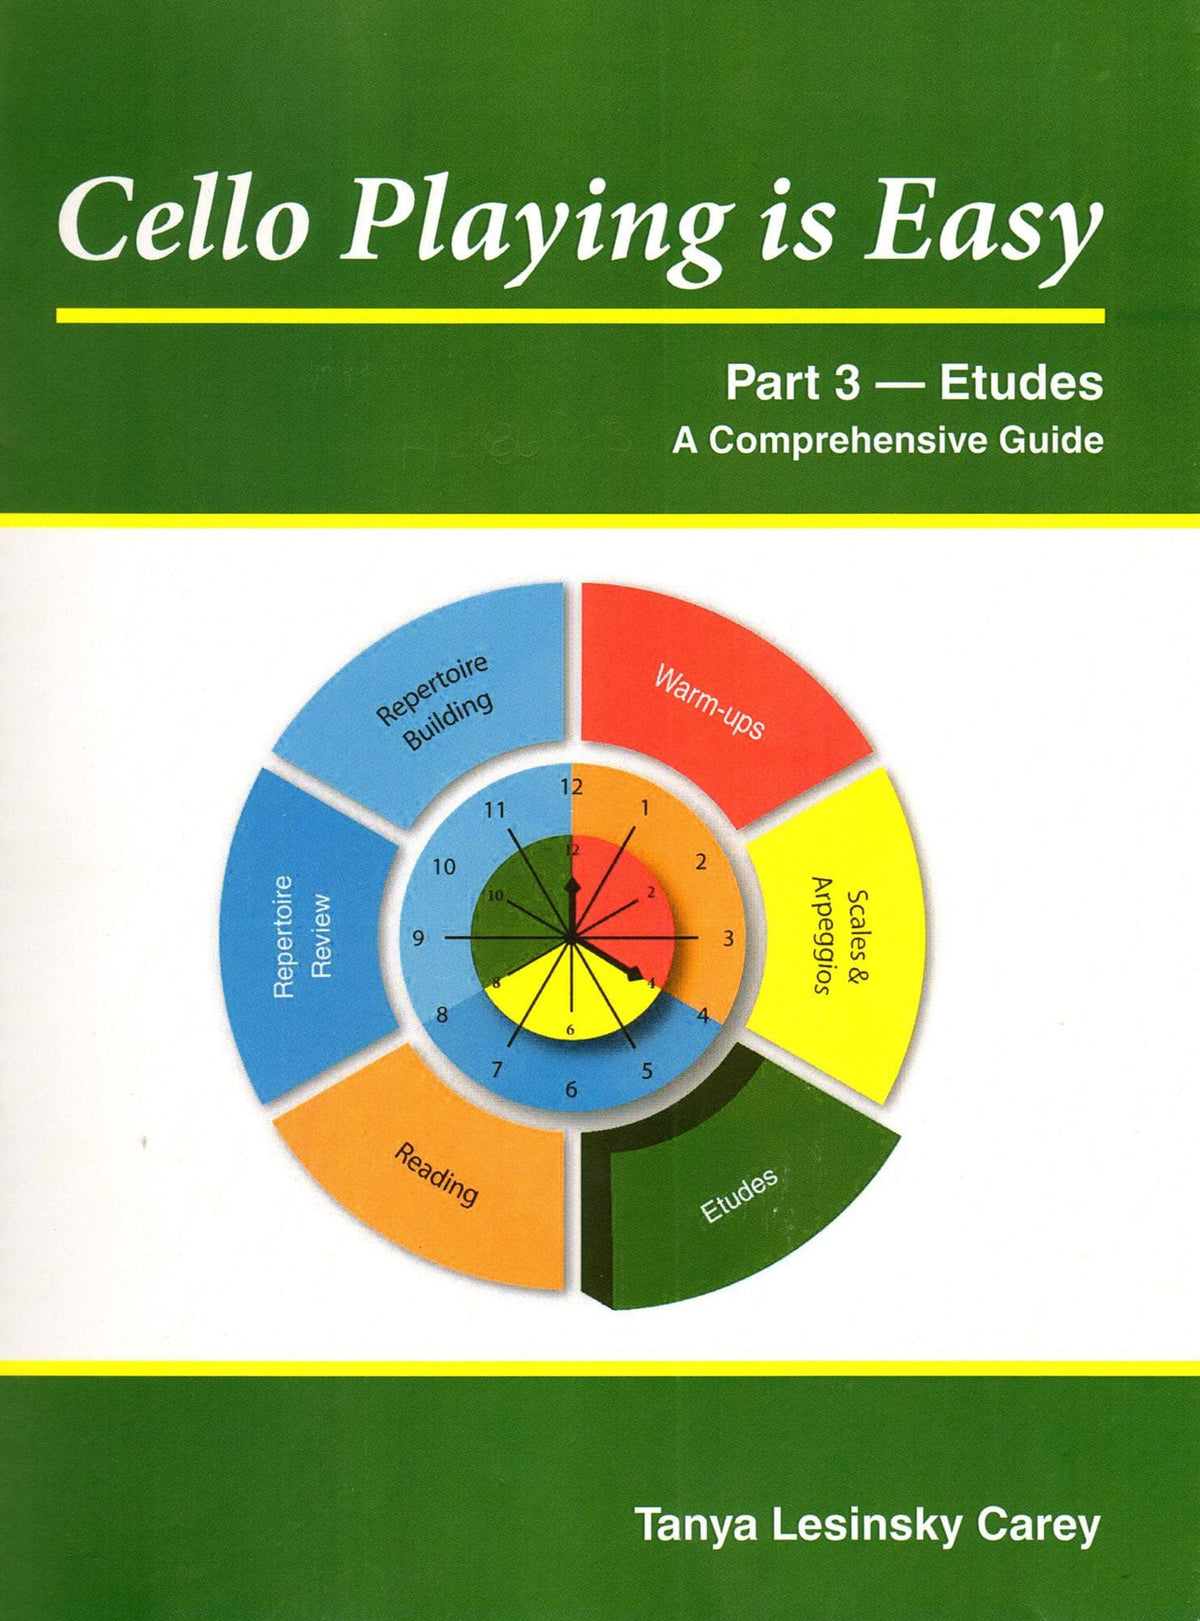 Cello Playing Is Easy Part 3: Etudes